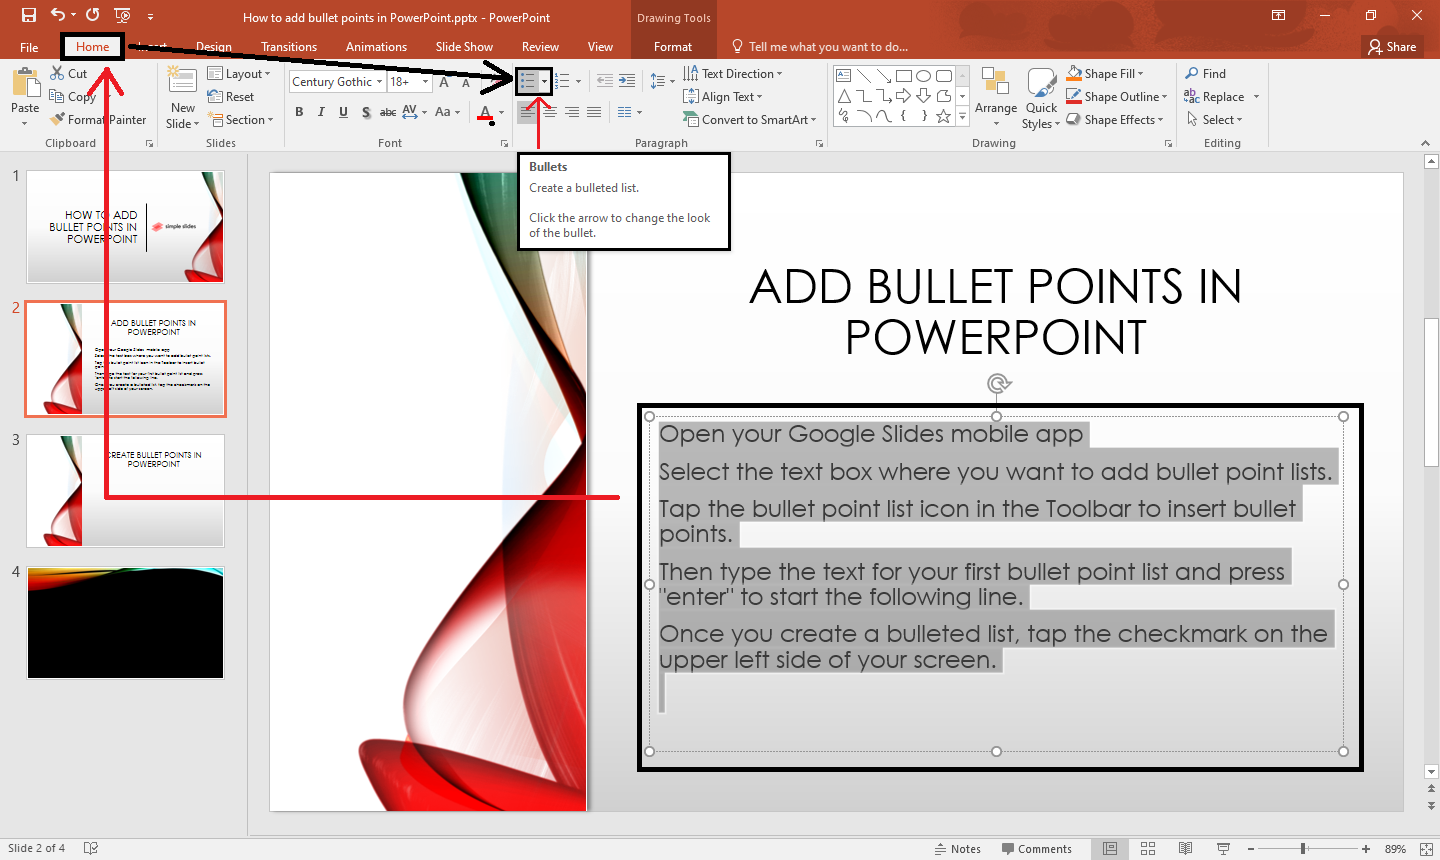 Highlight the text box where you want to put a bullewt point in PowerPoint then click the Bullets icon in the Home tab.